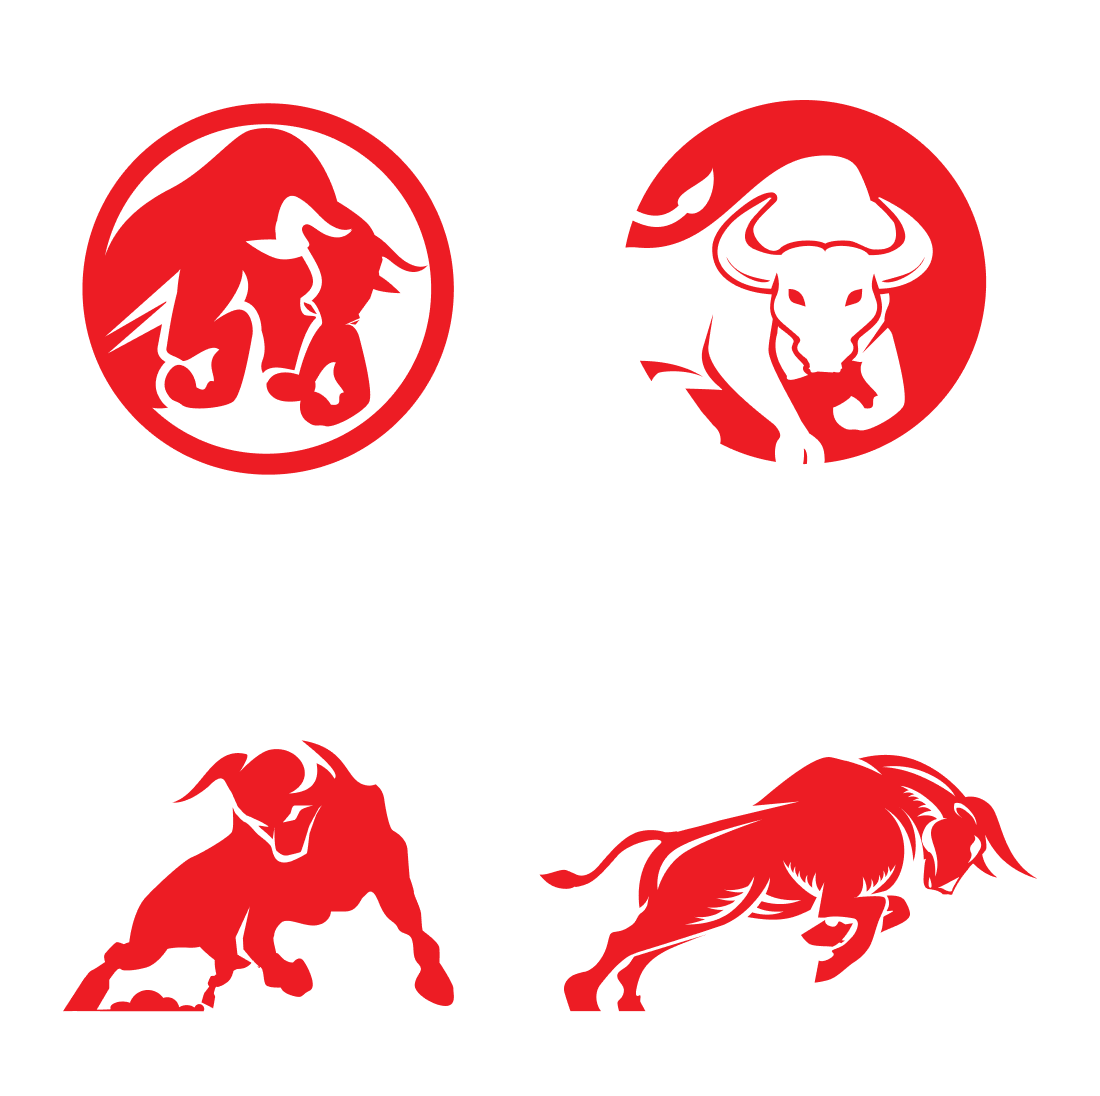 Bull and a bull with horns in the shape of a circle.